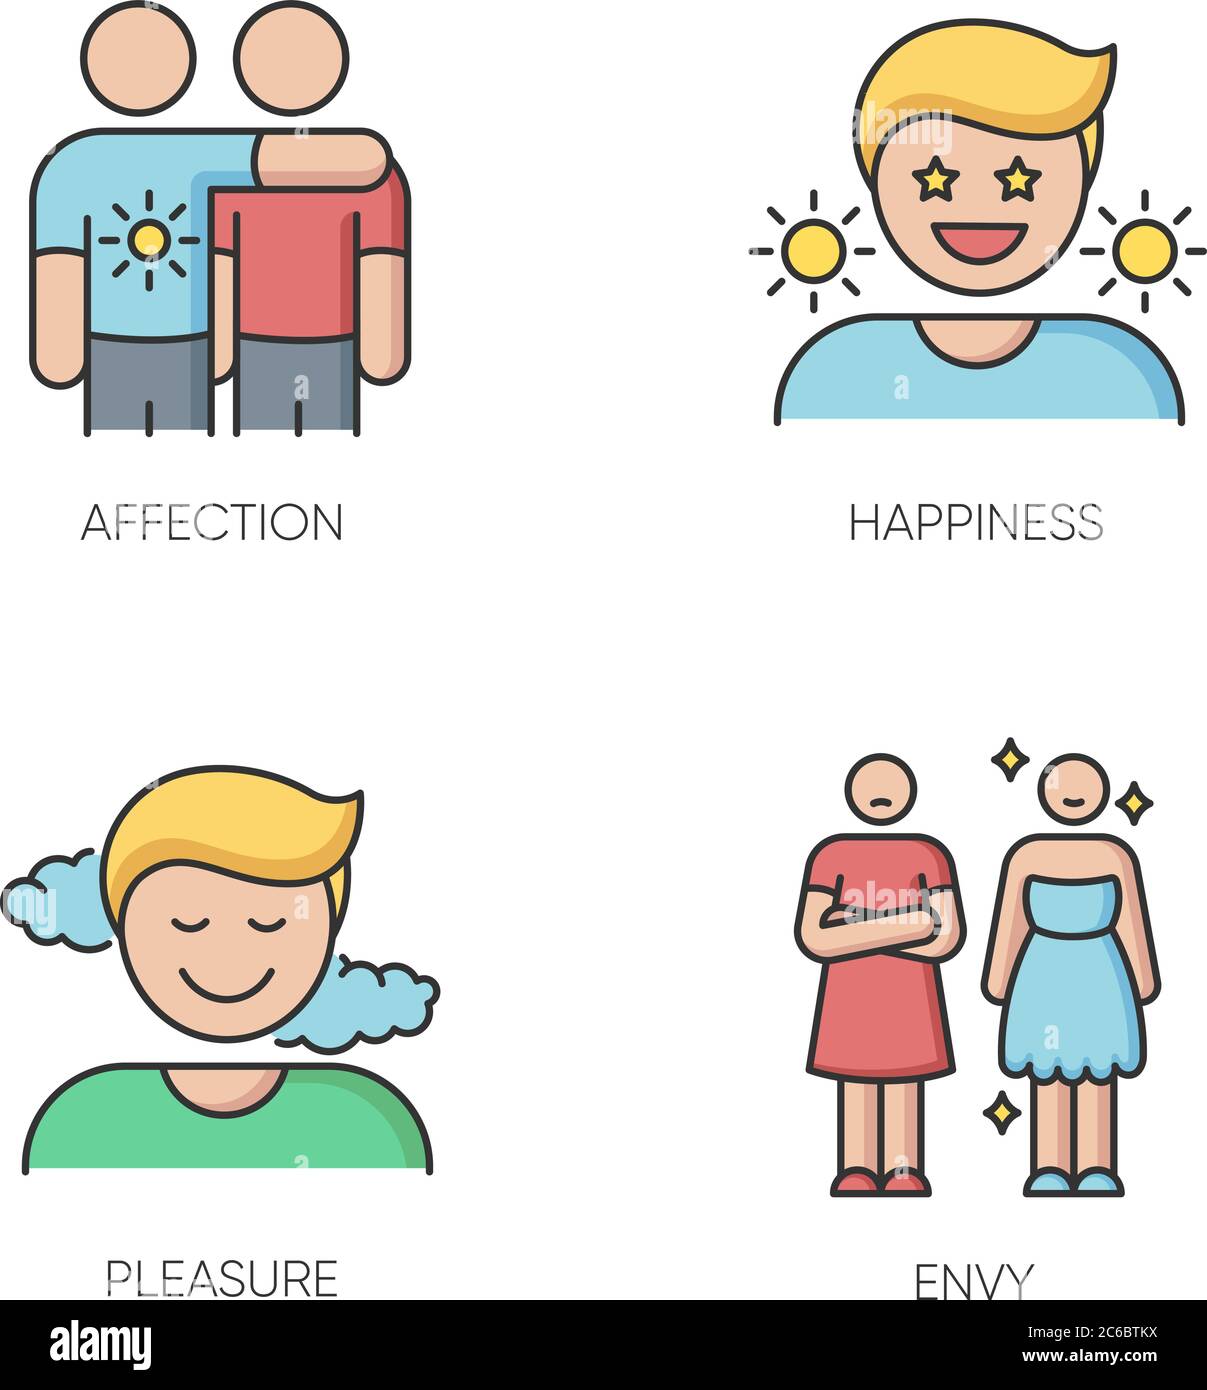 Positive and negative emotions RGB color icons set. Human feelings, emotional behaviour, mood. Affection, happiness, pleasure and envy. Isolated vecto Stock Vector